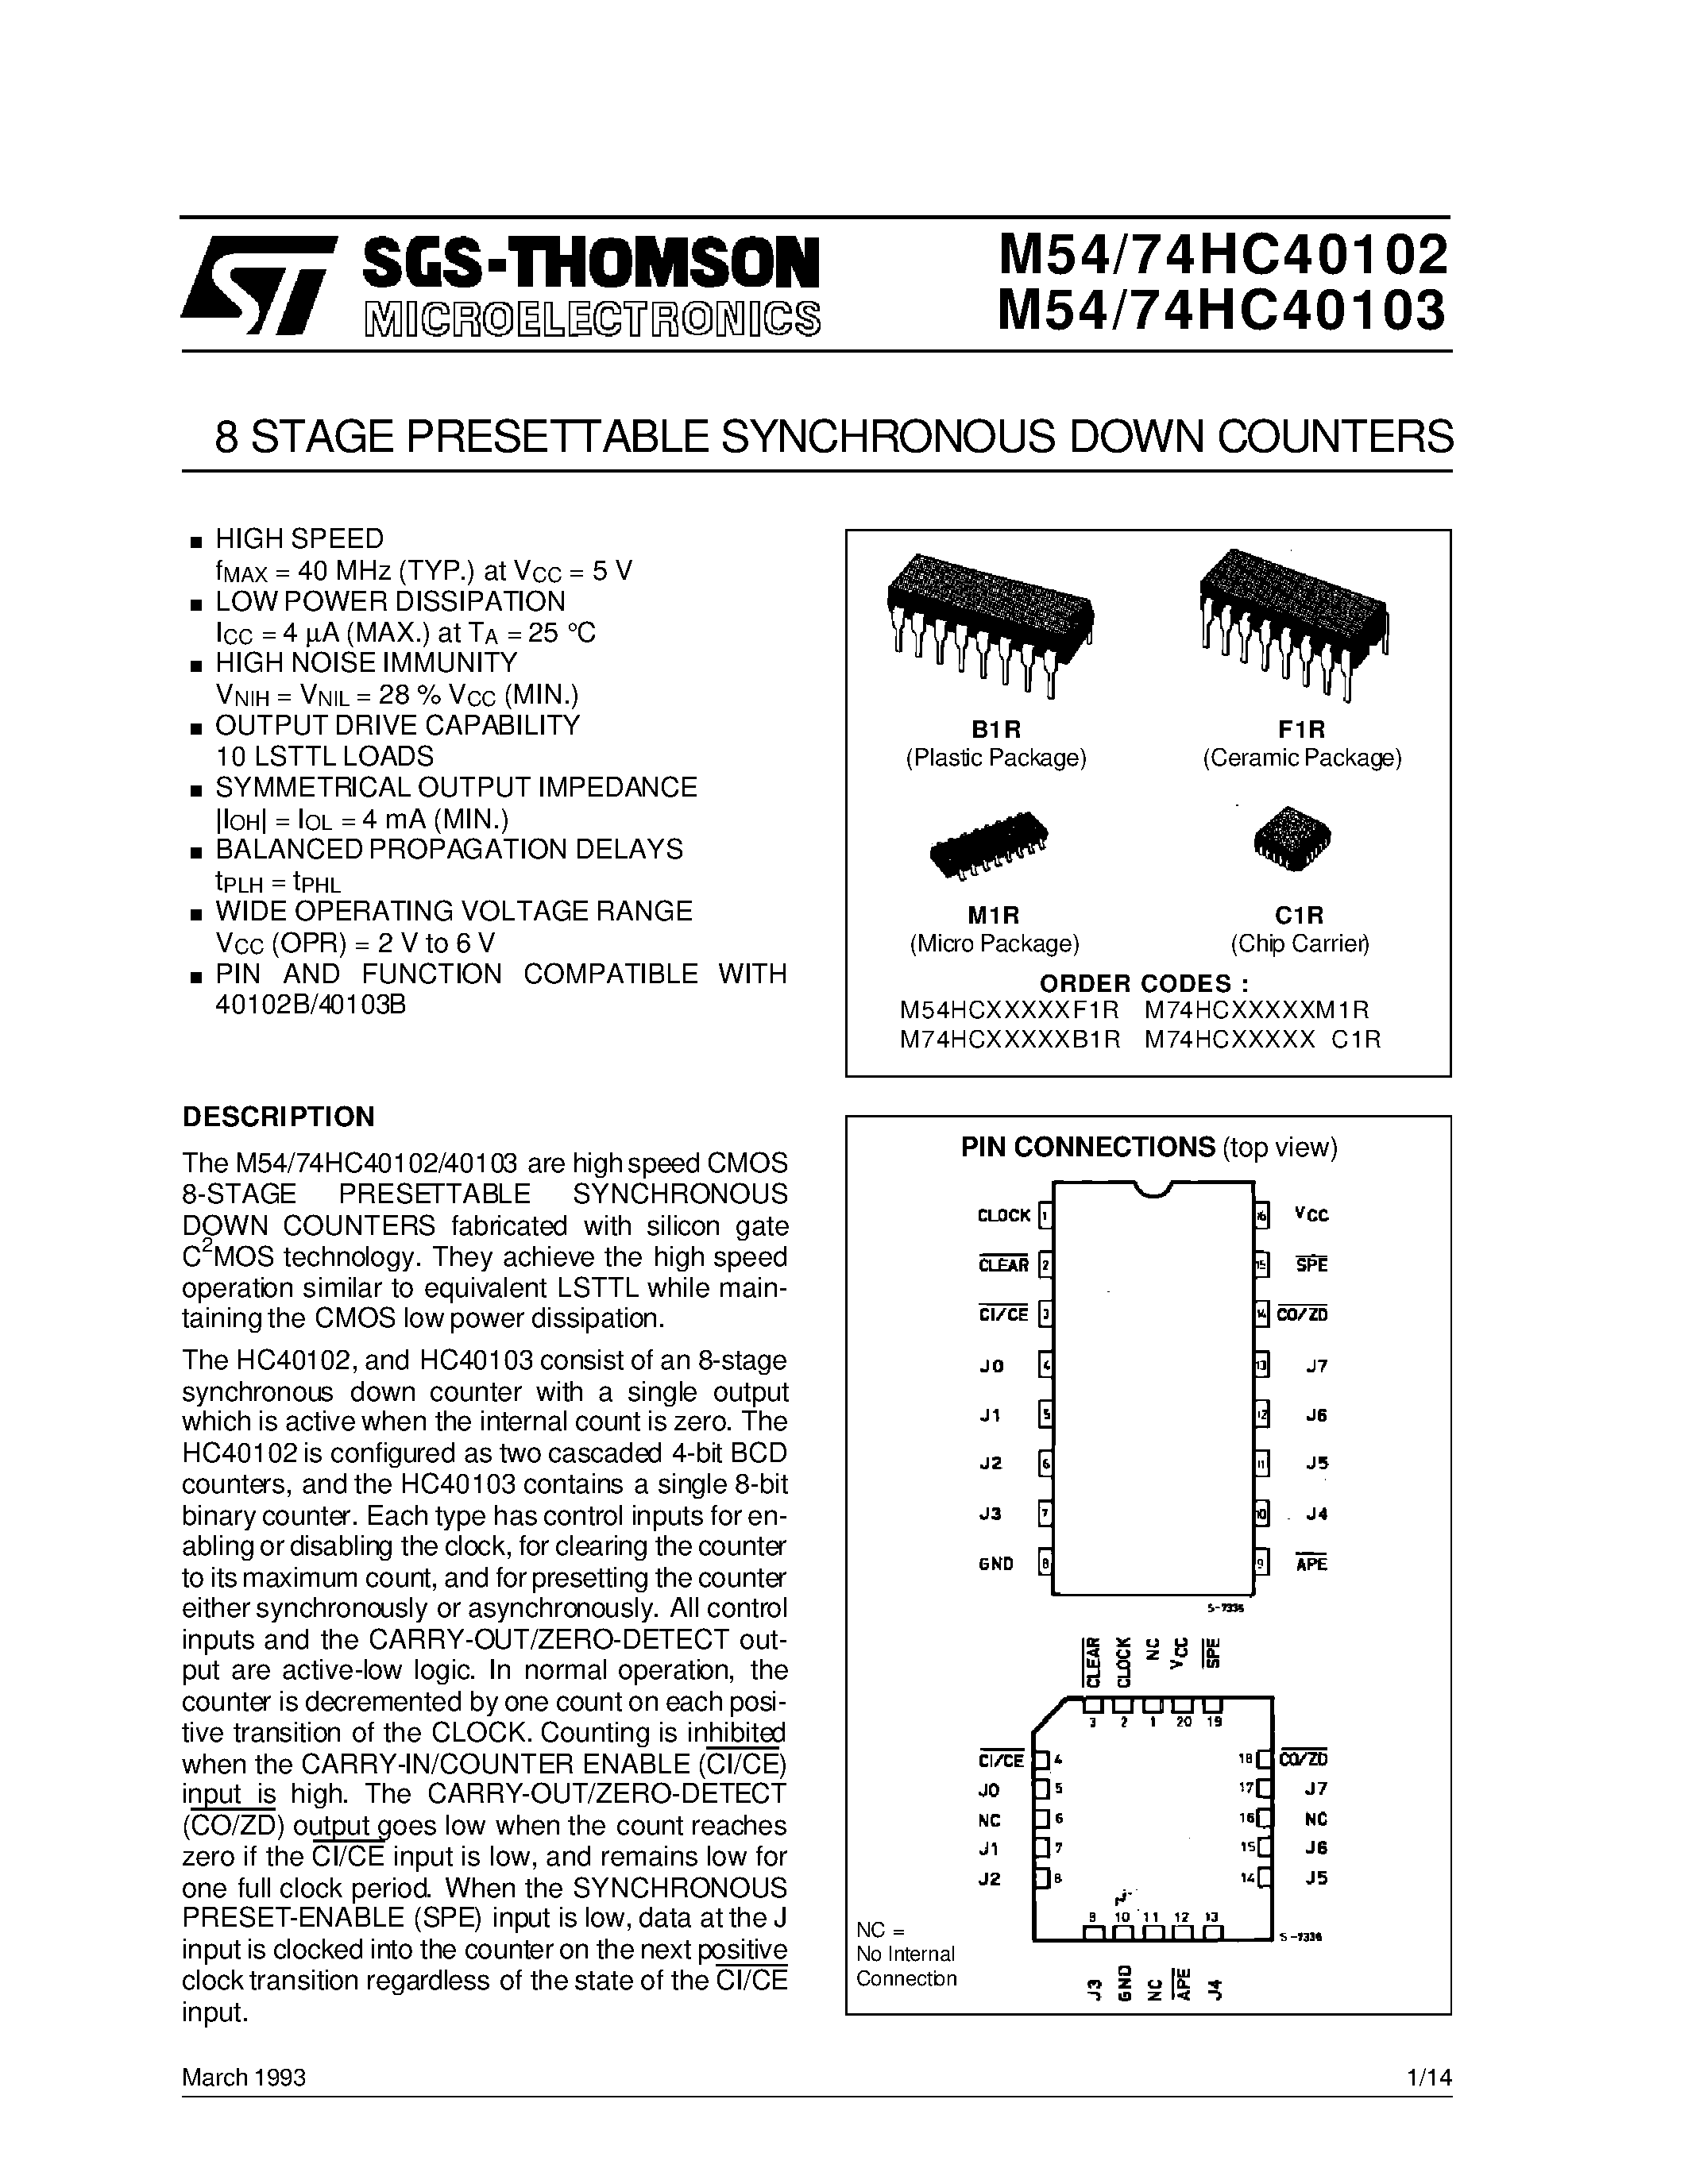 Datasheet M74HC40103 - 8 STAGE PRESETTABLE SYNCHRONOUS DOWN COUNTERS page 1